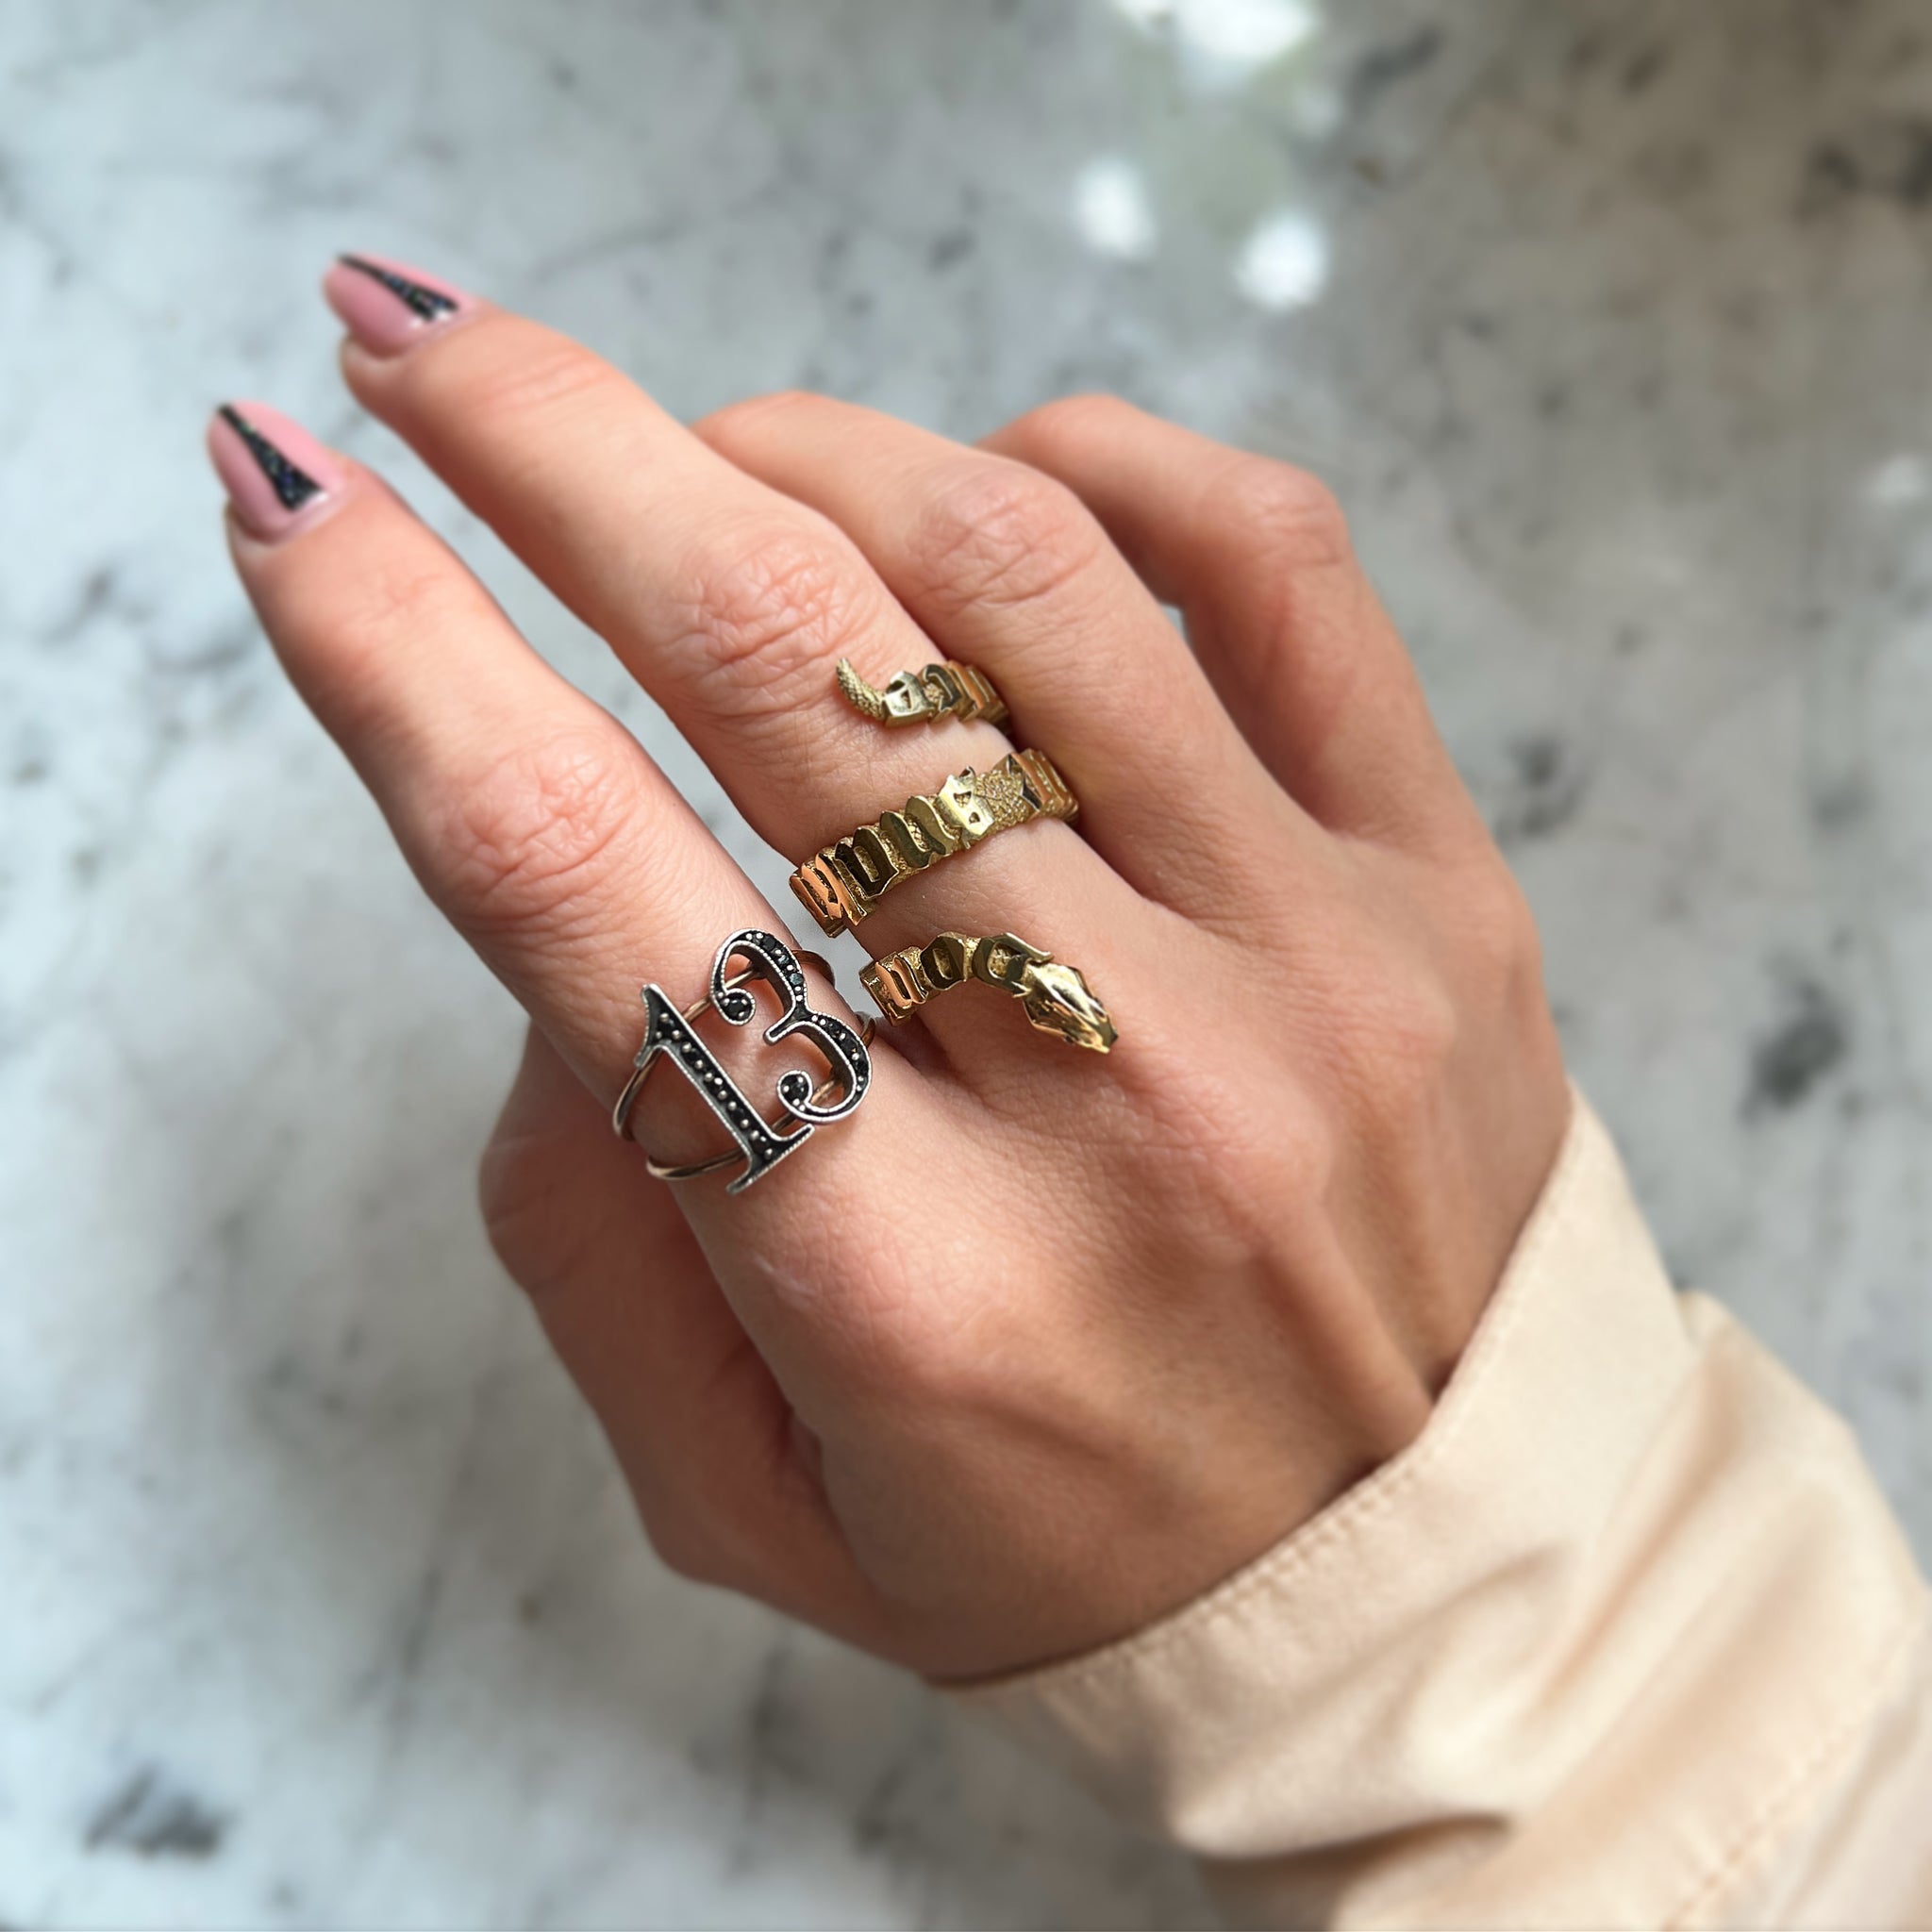 ‘Don’t let the same snake bite you twice’ ring